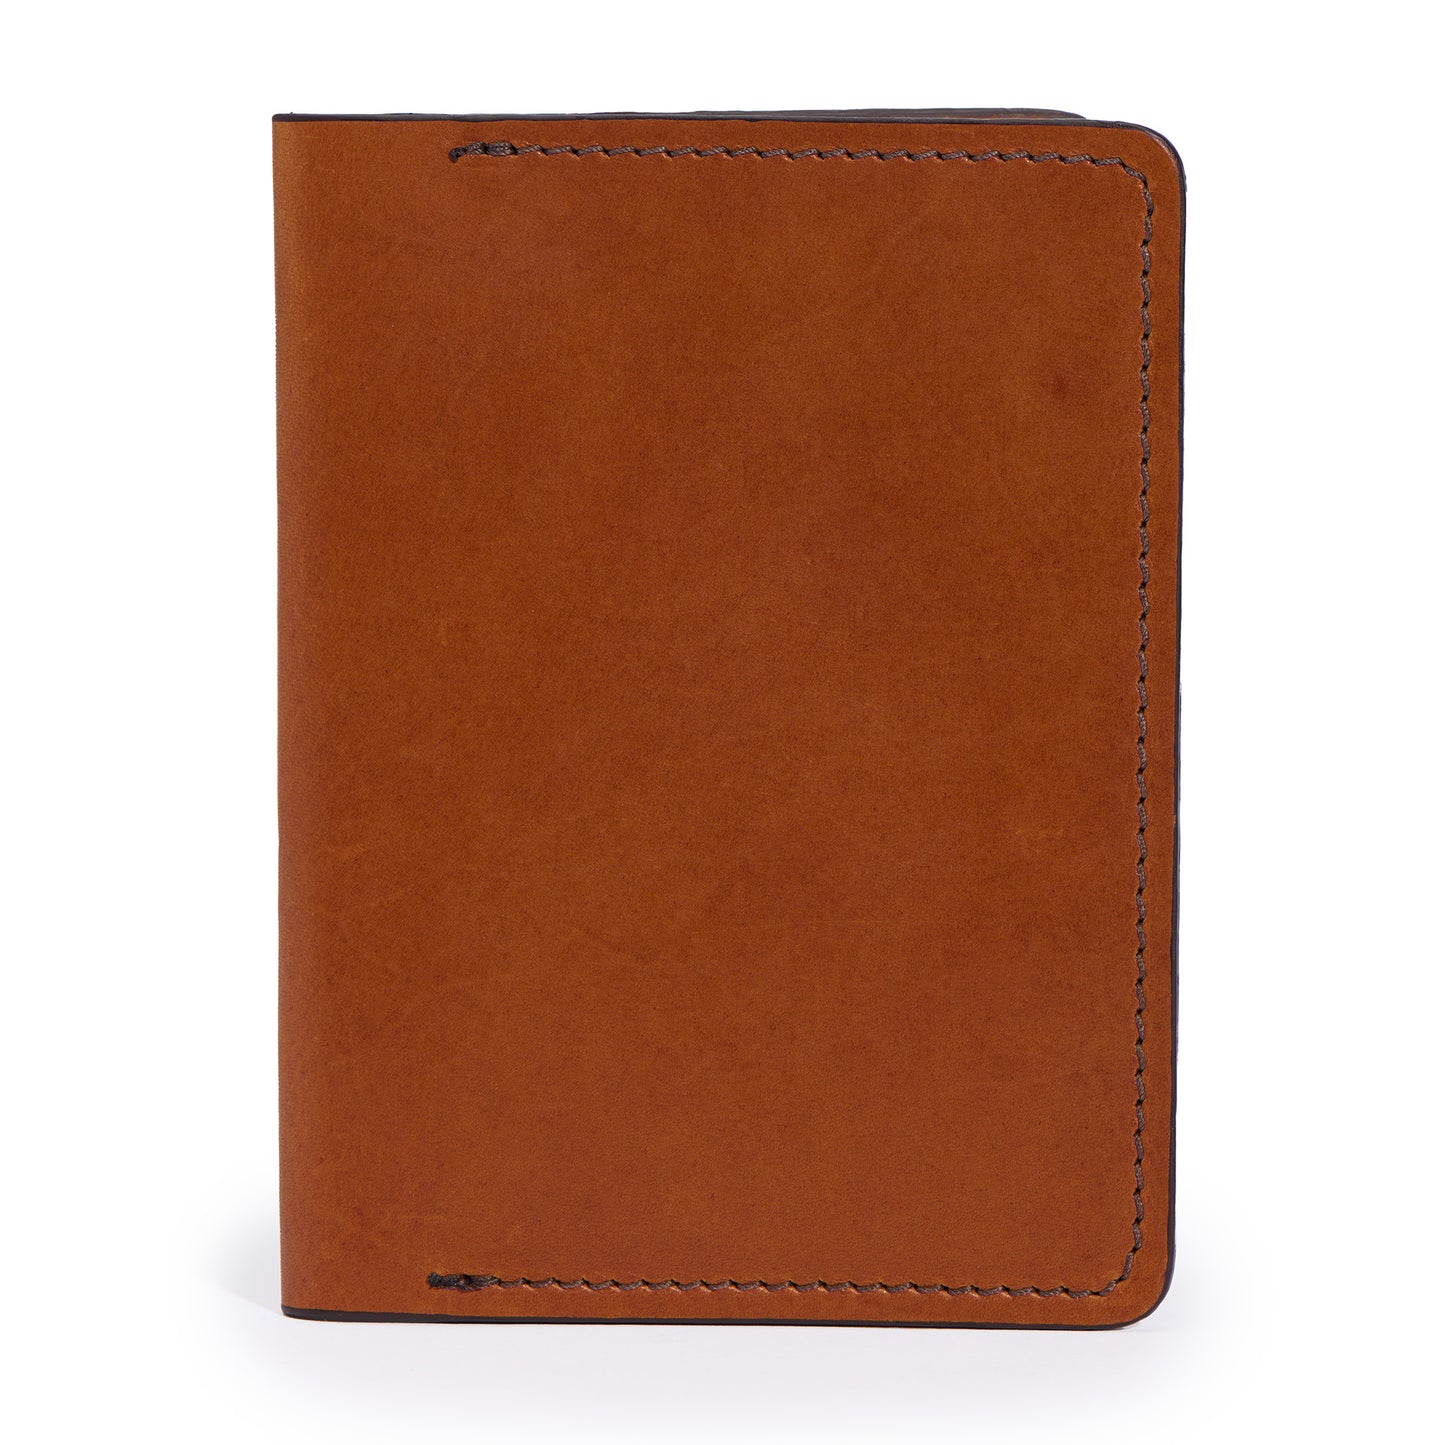 Jackson Wayne field note journal front - full grain leather in saddle tan